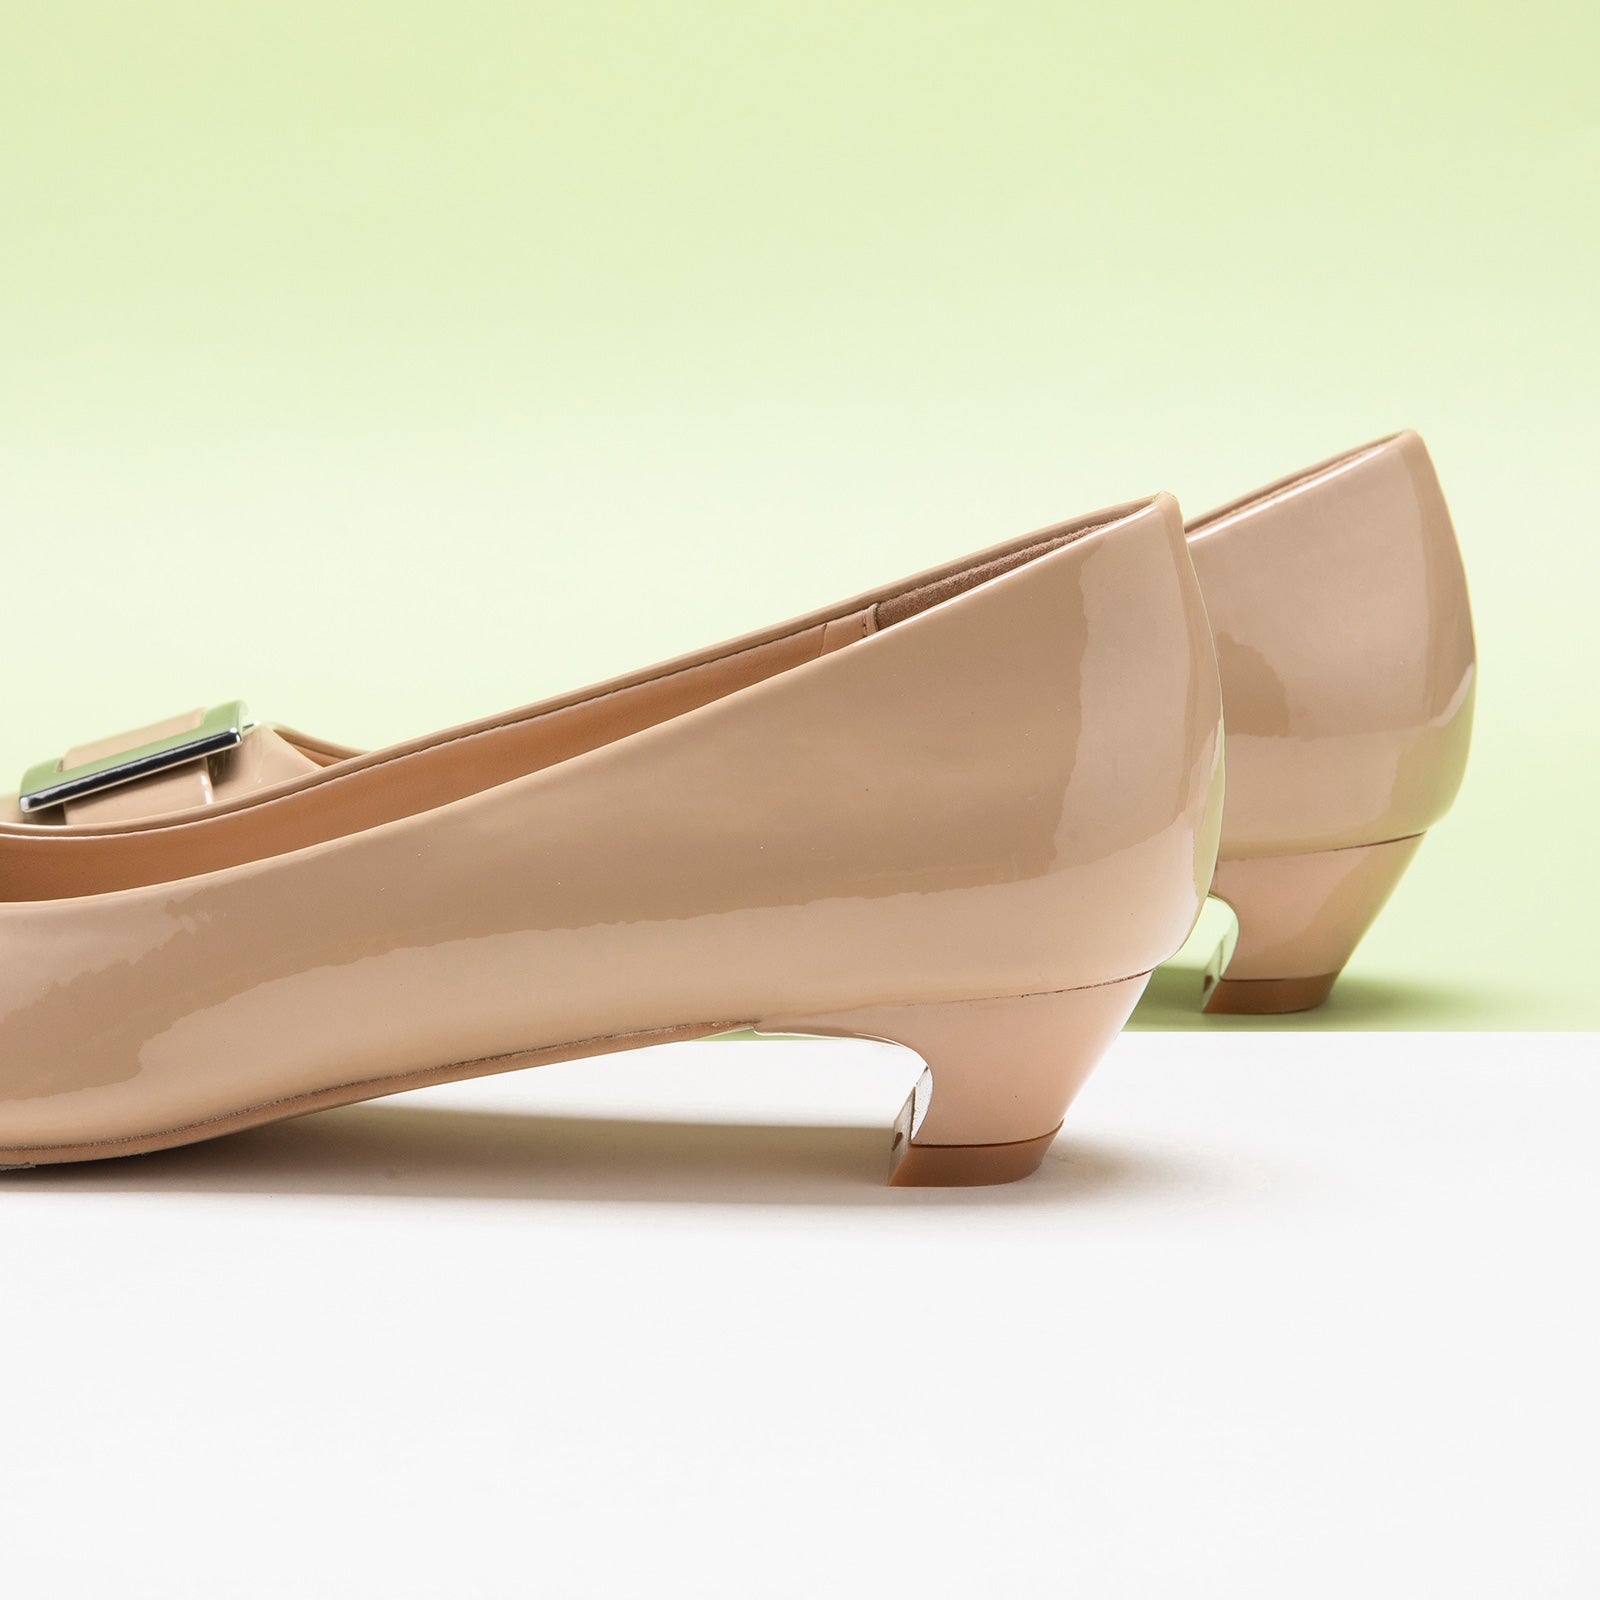 Beige Metal Buckle Low Heels, offering a subtle and stylish touch to any outfit.